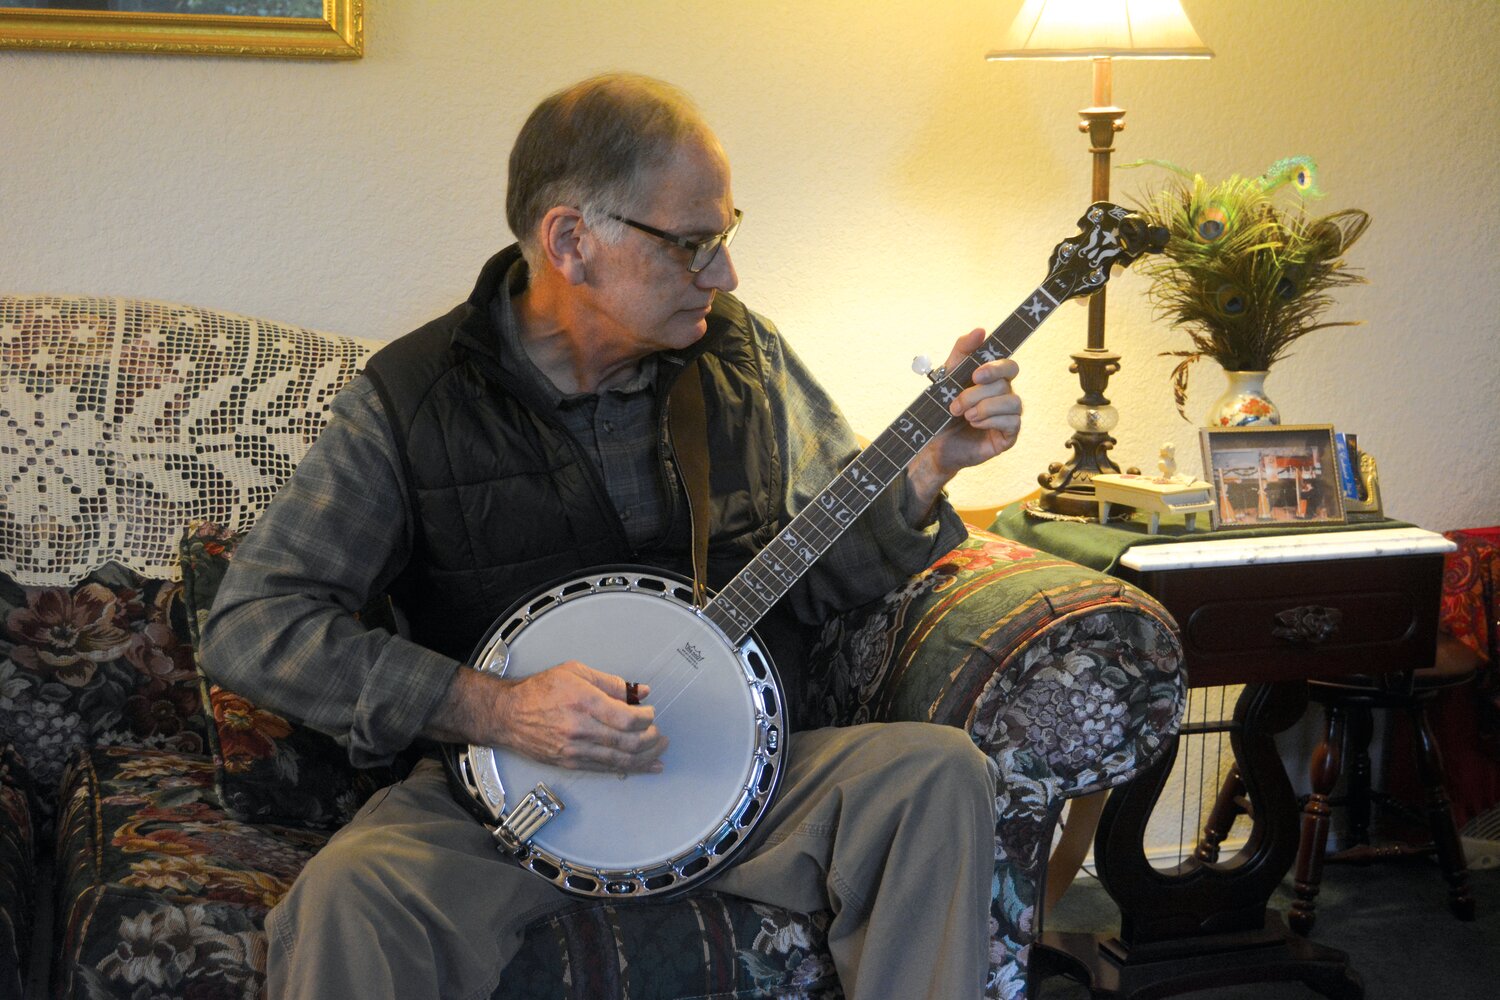 Curt Cleaveland demonstrates a song on the banjo on Oct. 24.